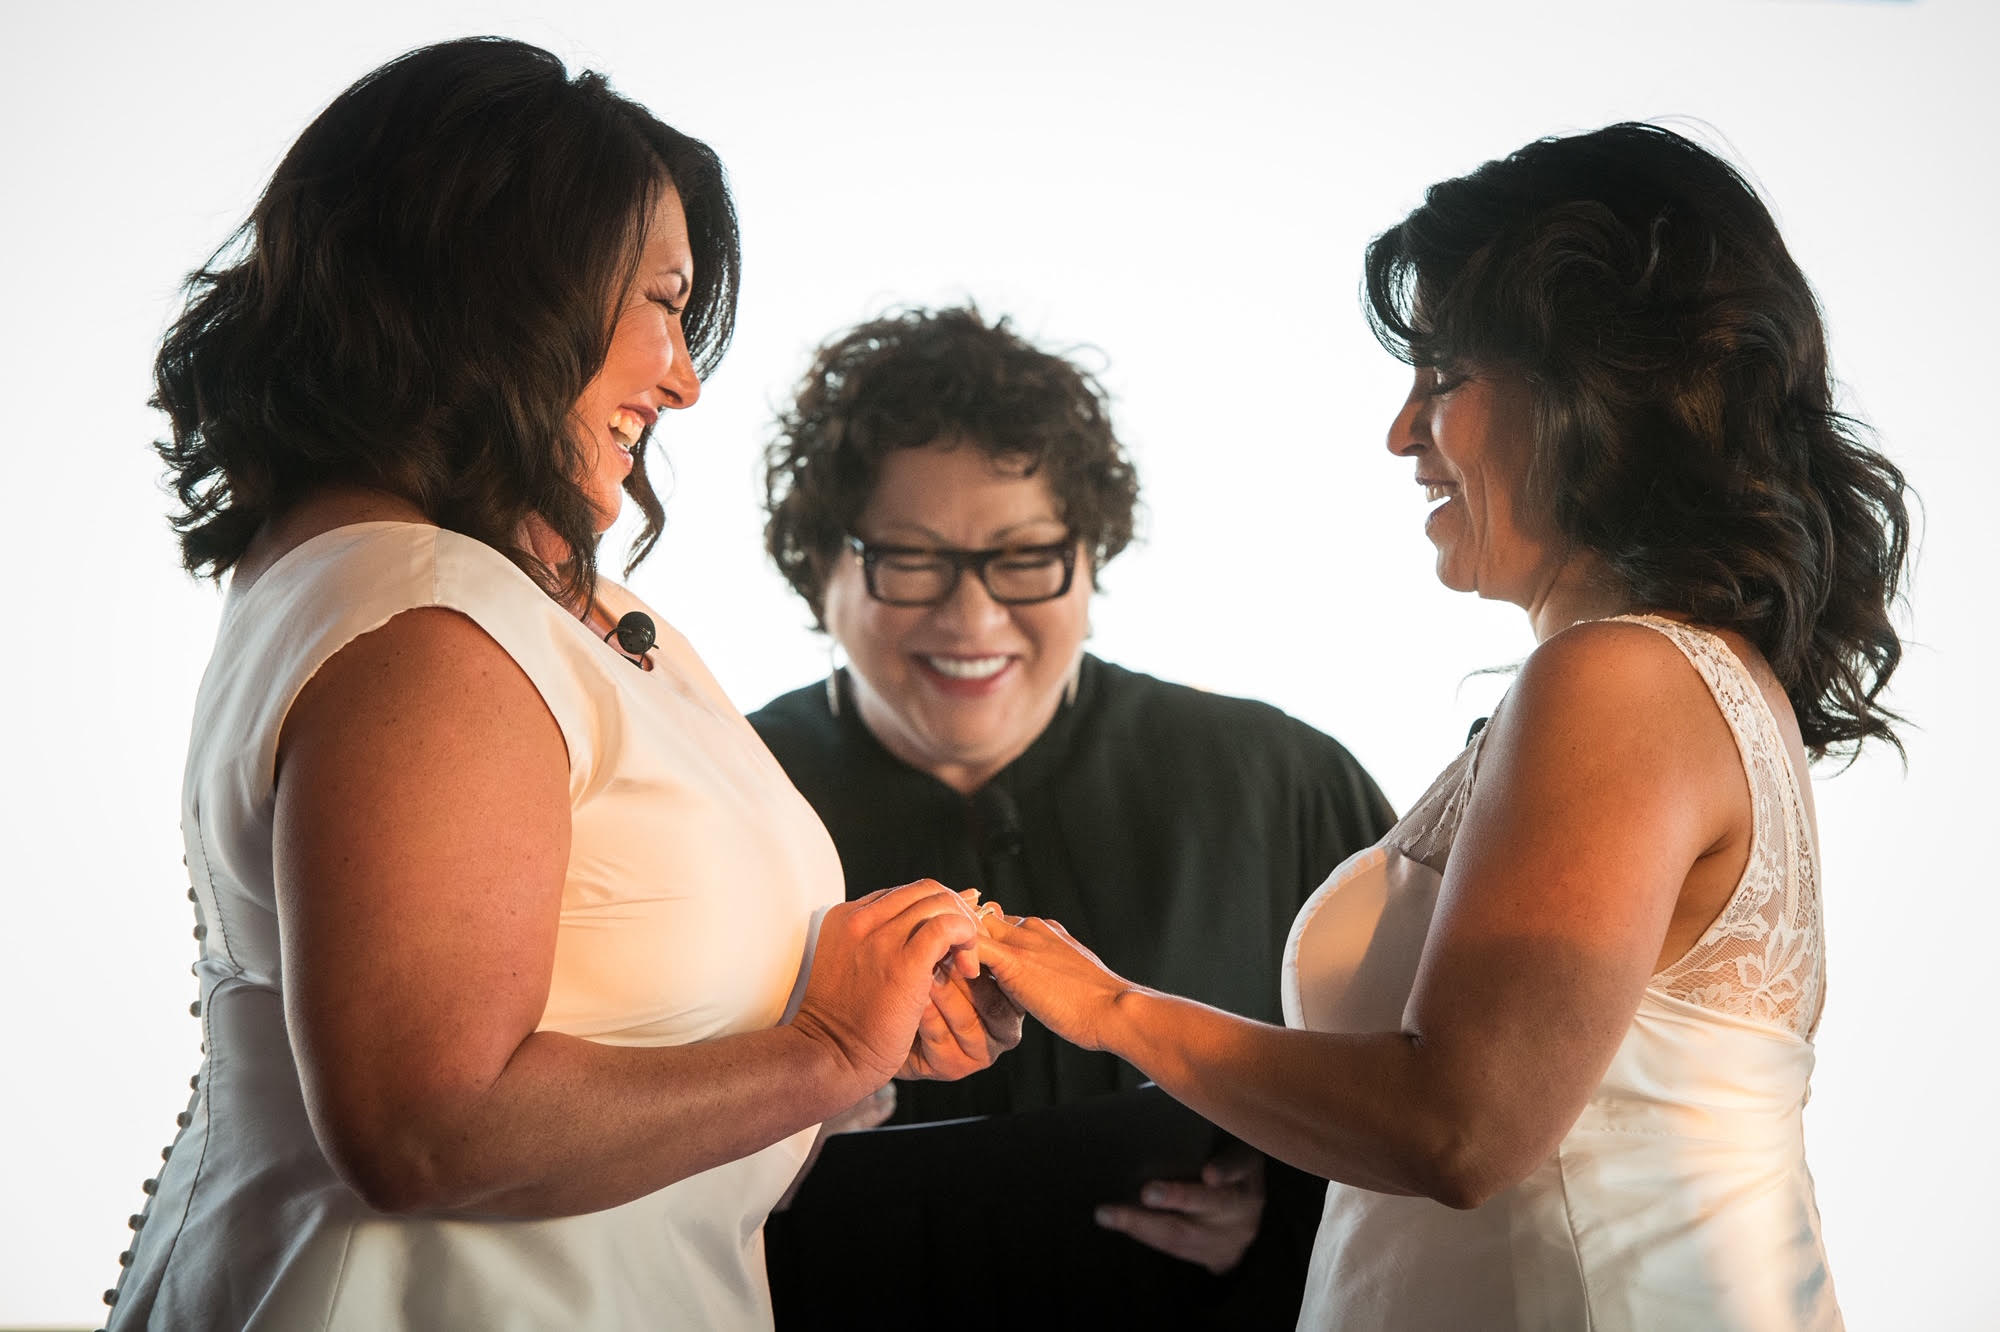 Ingrid Duran (L) and Catherine Pino (R) at their wedding, officiated by Justice Sonia Sotomayor